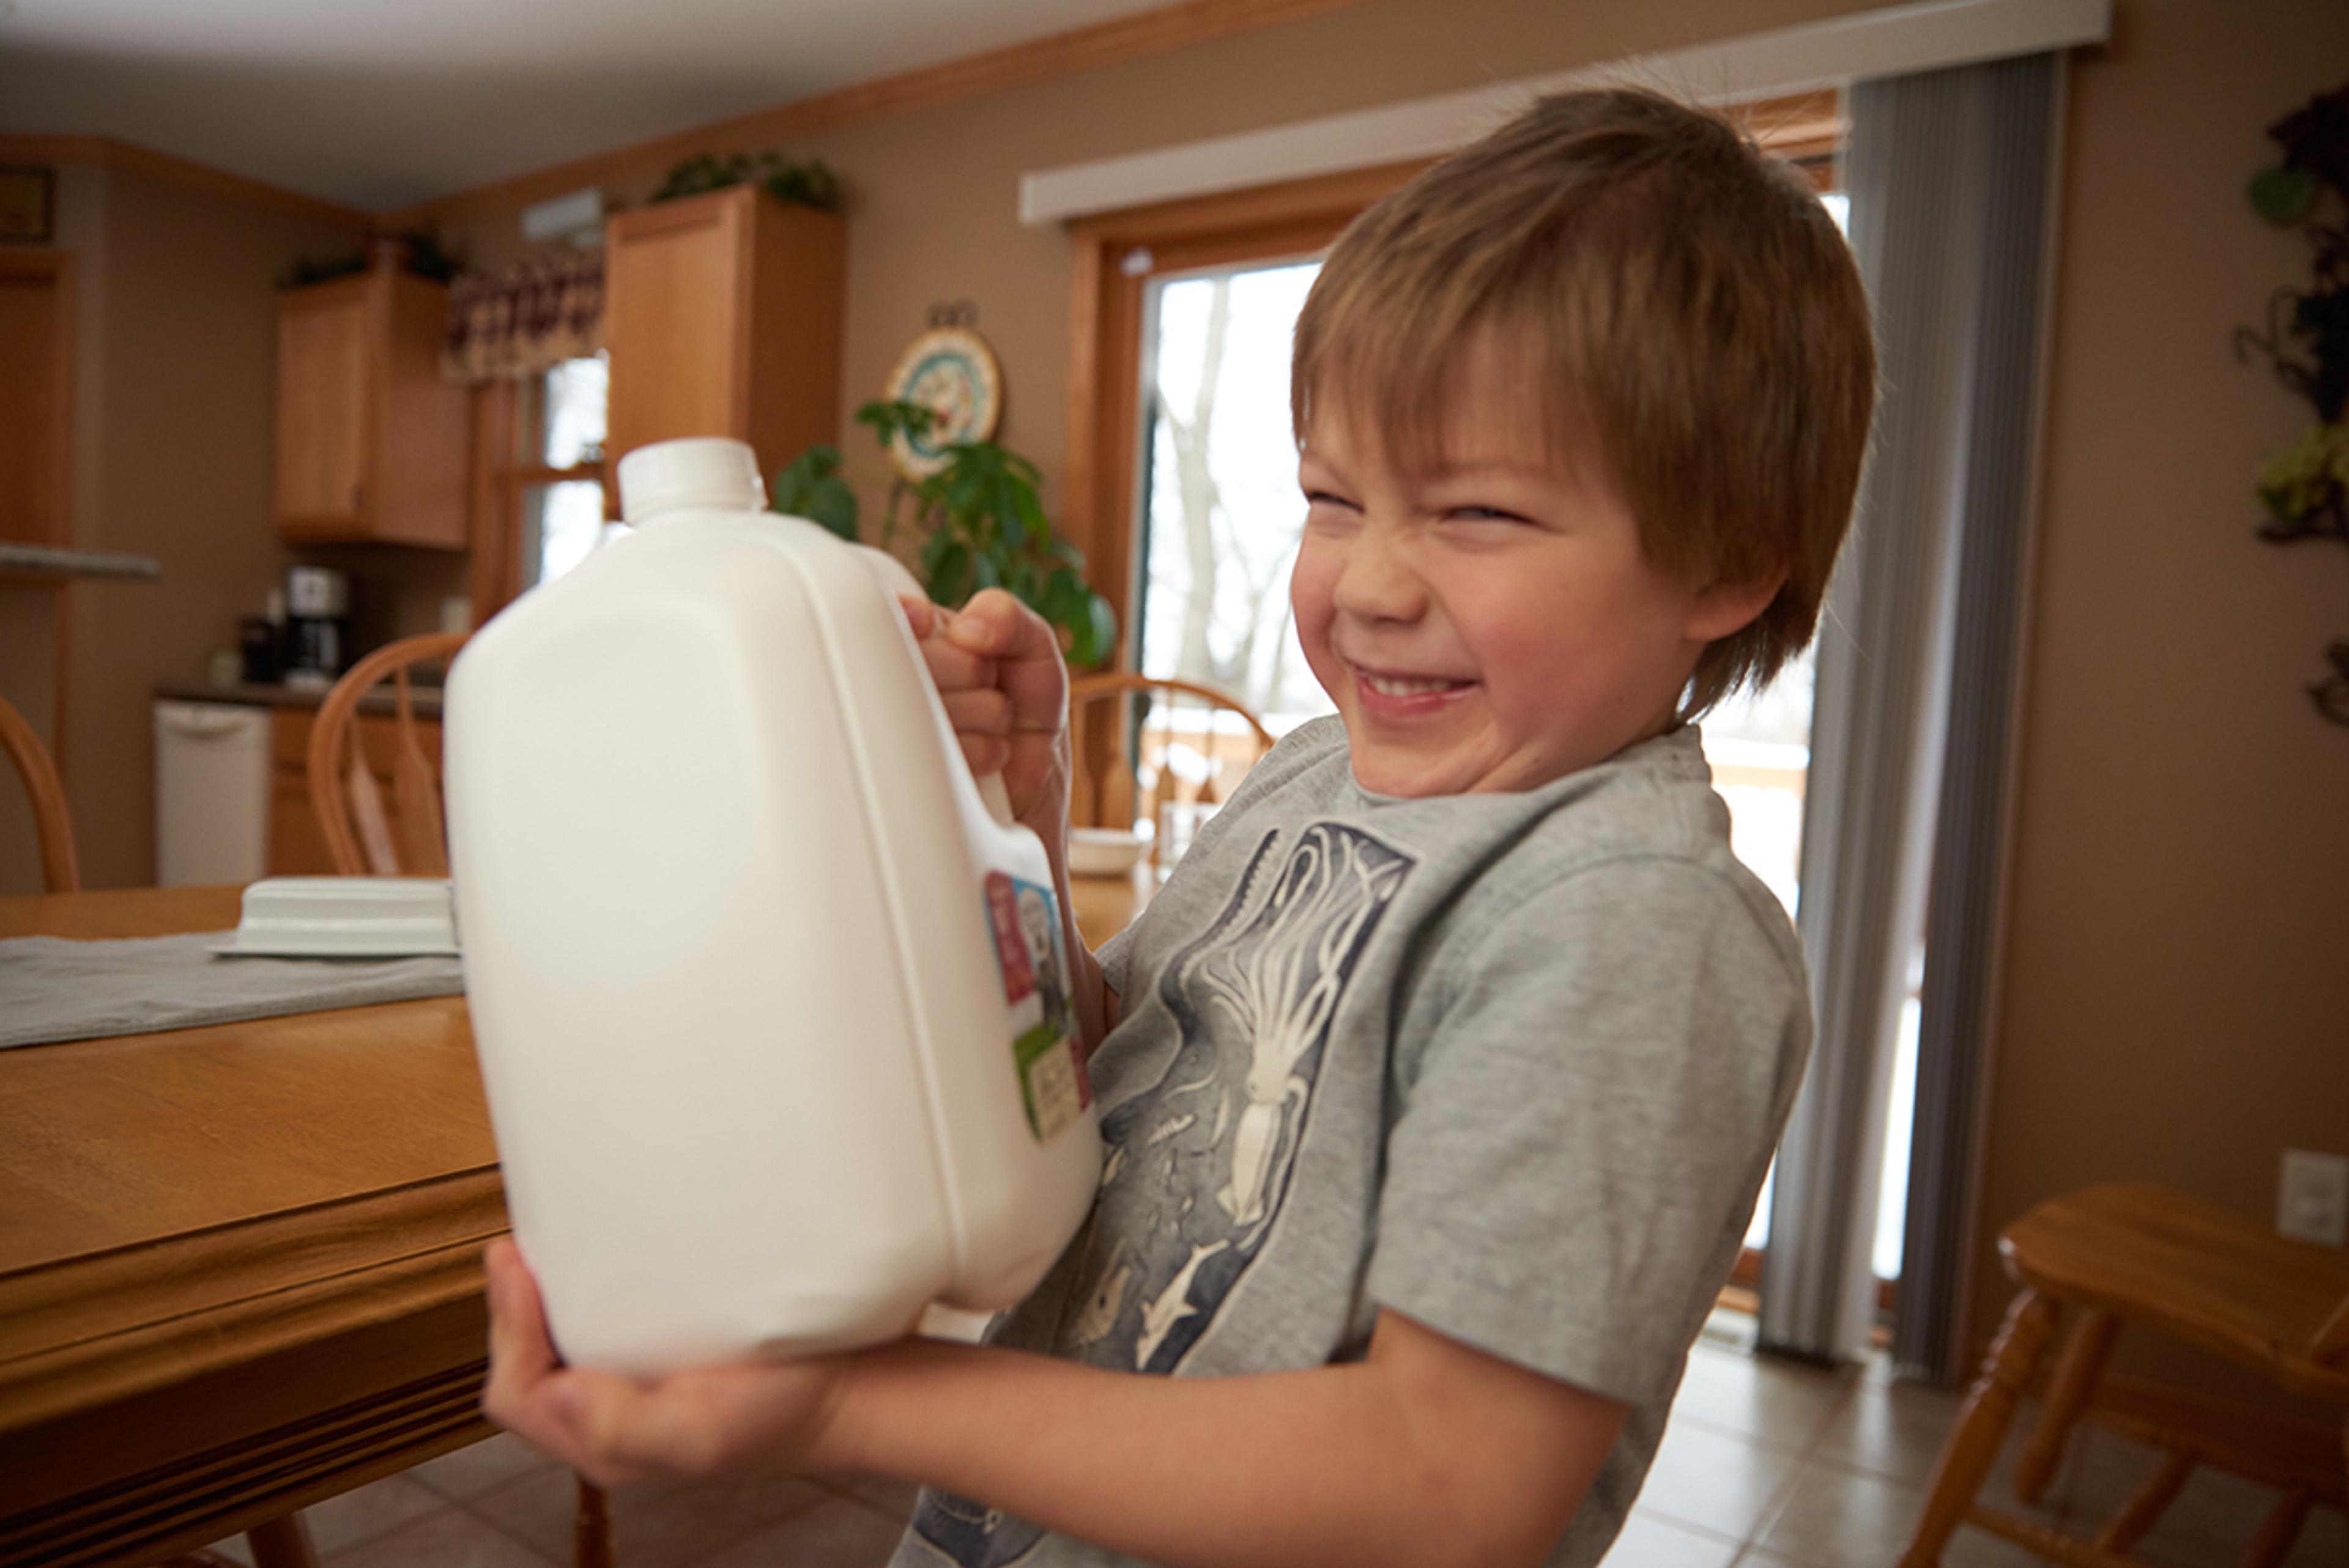 Young boy holds a gallon of Organic Valley milk and smiles to the camera.